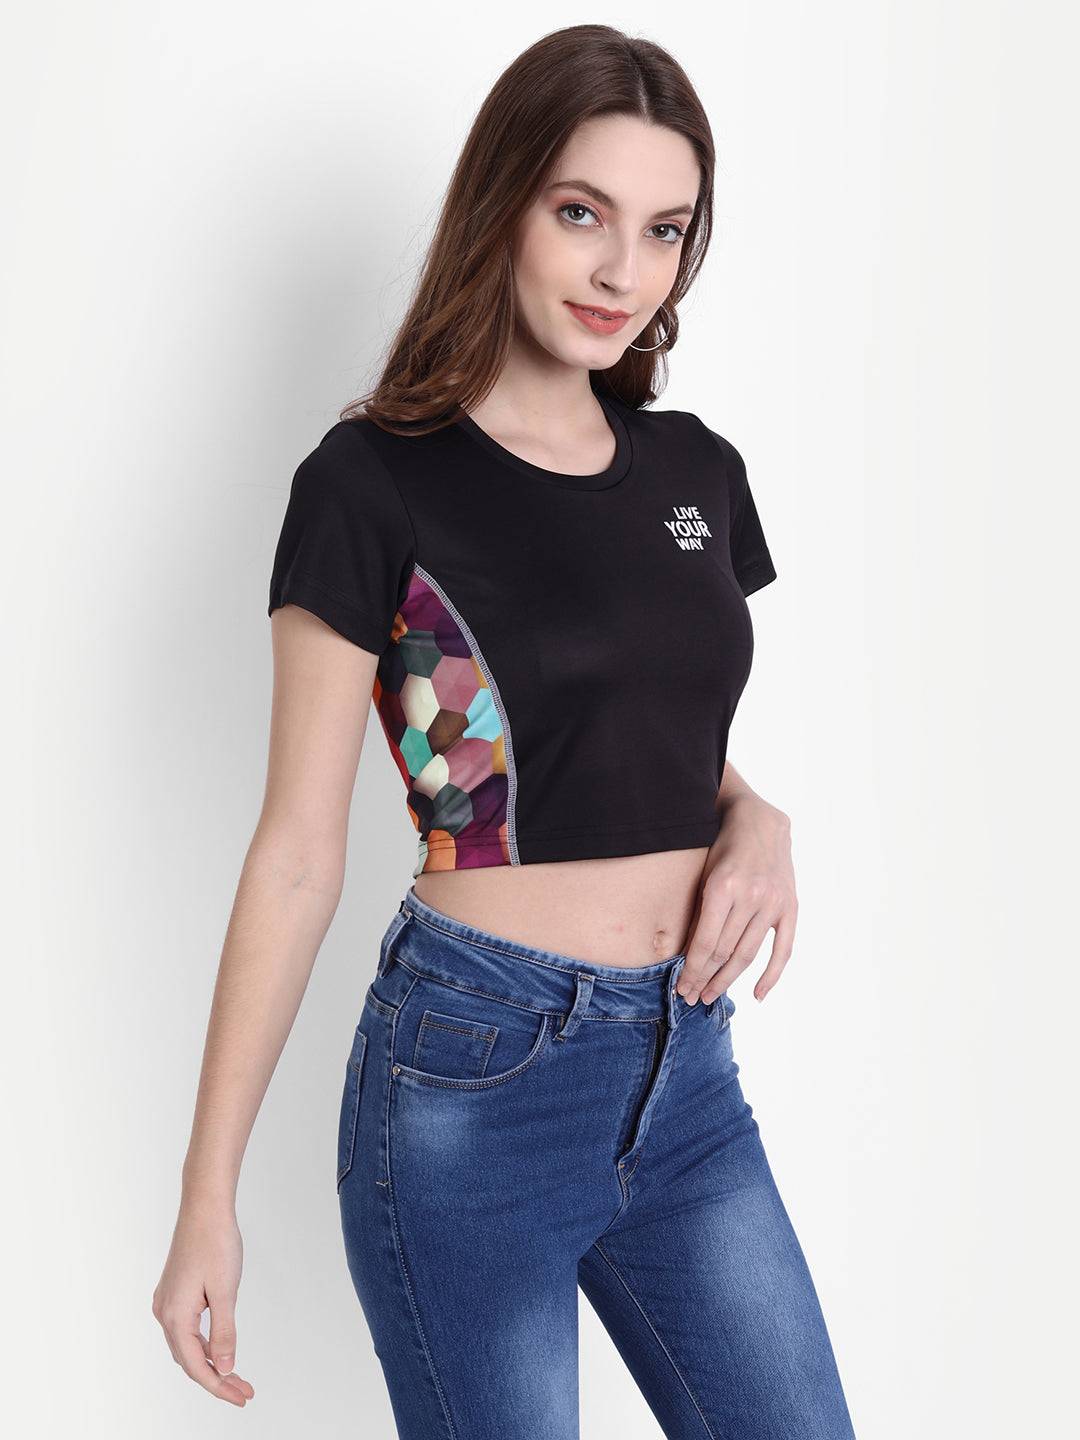 LONG BACK CROP TOP BLACK AND COLOR BLOCK RWW2046